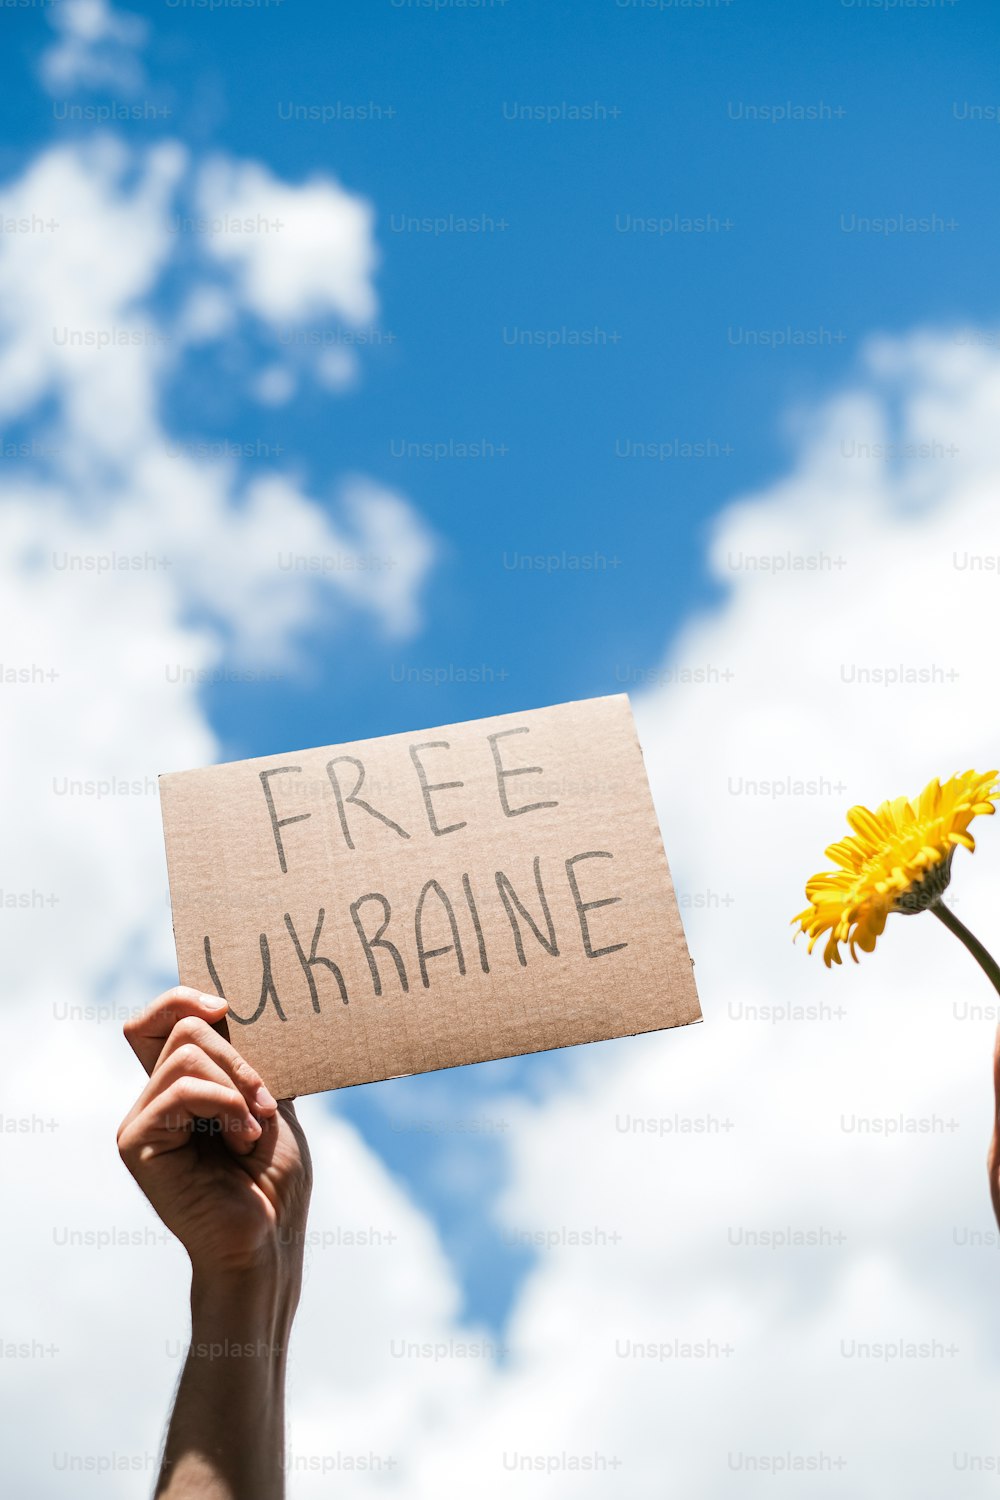 a person holding a sign that says free ukraine